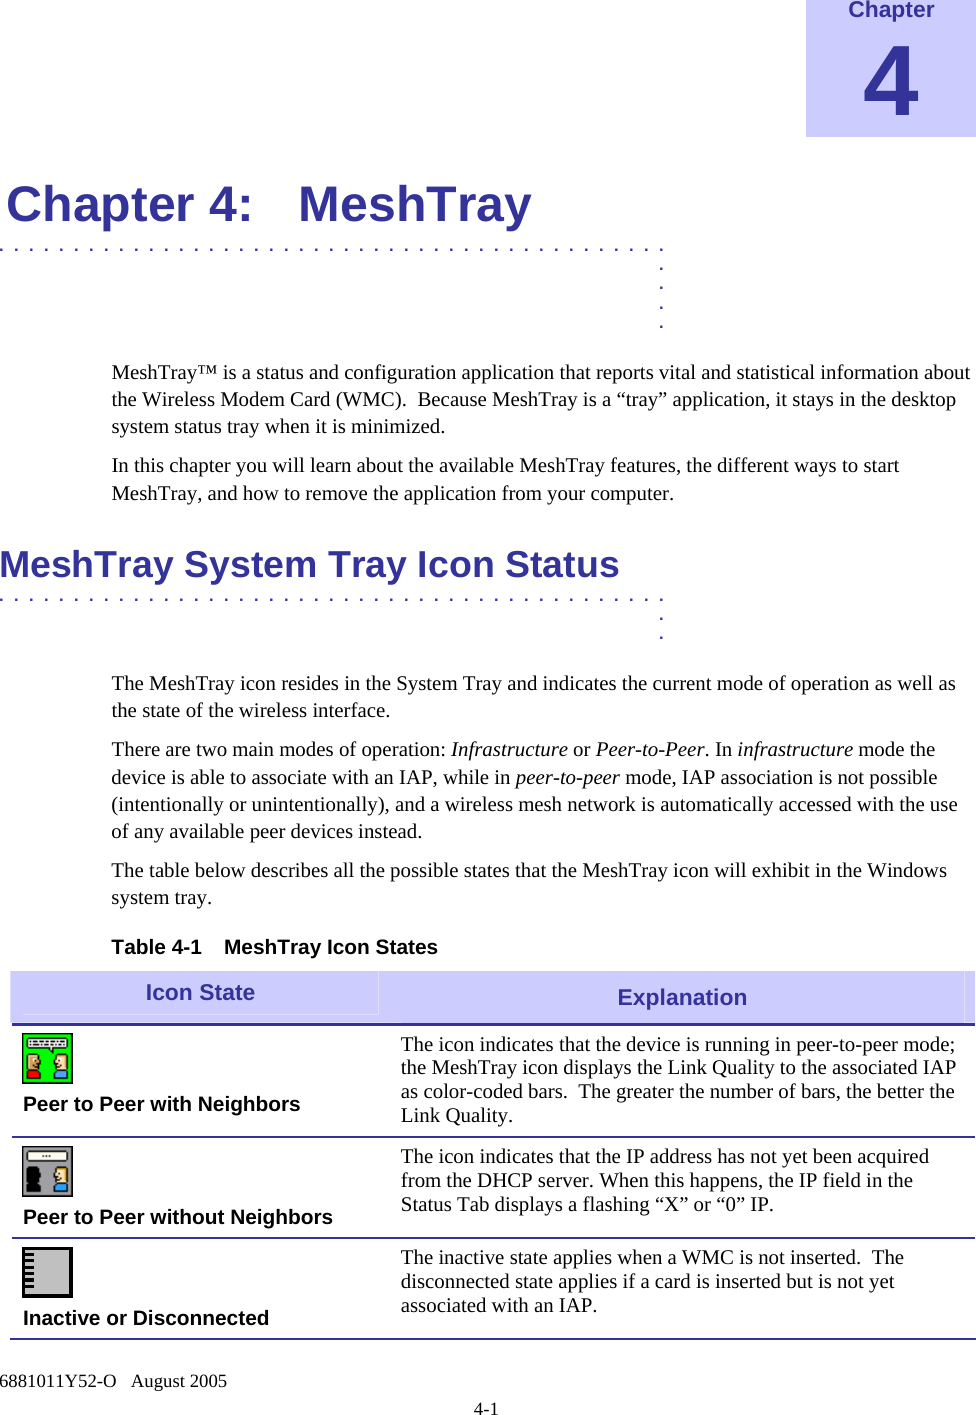  6881011Y52-O   August 2005 4-1 Chapter 4 Chapter 4:  MeshTray .............................................  .  .  .  . MeshTray™ is a status and configuration application that reports vital and statistical information about the Wireless Modem Card (WMC).  Because MeshTray is a “tray” application, it stays in the desktop system status tray when it is minimized. In this chapter you will learn about the available MeshTray features, the different ways to start MeshTray, and how to remove the application from your computer. MeshTray System Tray Icon Status .............................................  .  . The MeshTray icon resides in the System Tray and indicates the current mode of operation as well as the state of the wireless interface.   There are two main modes of operation: Infrastructure or Peer-to-Peer. In infrastructure mode the device is able to associate with an IAP, while in peer-to-peer mode, IAP association is not possible (intentionally or unintentionally), and a wireless mesh network is automatically accessed with the use of any available peer devices instead.  The table below describes all the possible states that the MeshTray icon will exhibit in the Windows system tray. Table 4-1  MeshTray Icon States Icon State  Explanation  Peer to Peer with Neighbors The icon indicates that the device is running in peer-to-peer mode; the MeshTray icon displays the Link Quality to the associated IAP as color-coded bars.  The greater the number of bars, the better the Link Quality.  Peer to Peer without Neighbors The icon indicates that the IP address has not yet been acquired from the DHCP server. When this happens, the IP field in the Status Tab displays a flashing “X” or “0” IP.  Inactive or Disconnected The inactive state applies when a WMC is not inserted.  The disconnected state applies if a card is inserted but is not yet associated with an IAP. 